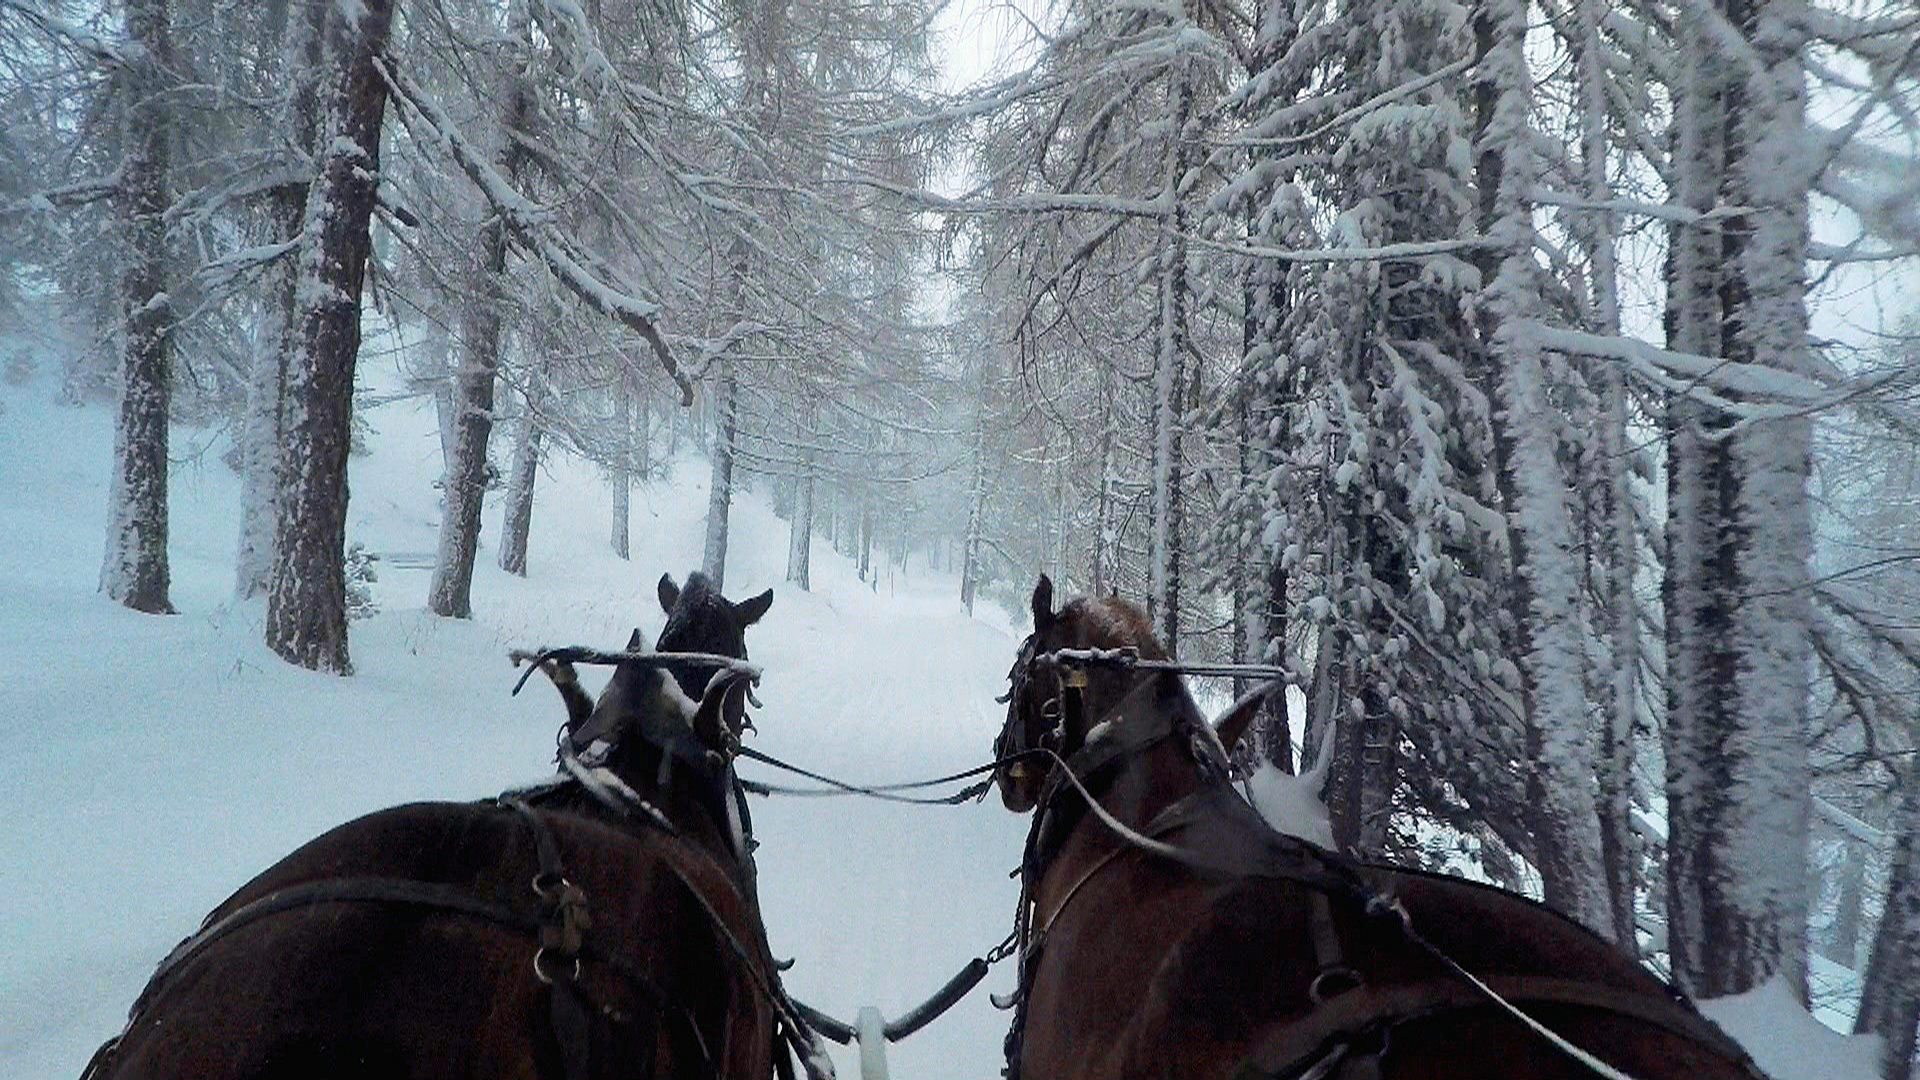 Horses pulling carriage in snow